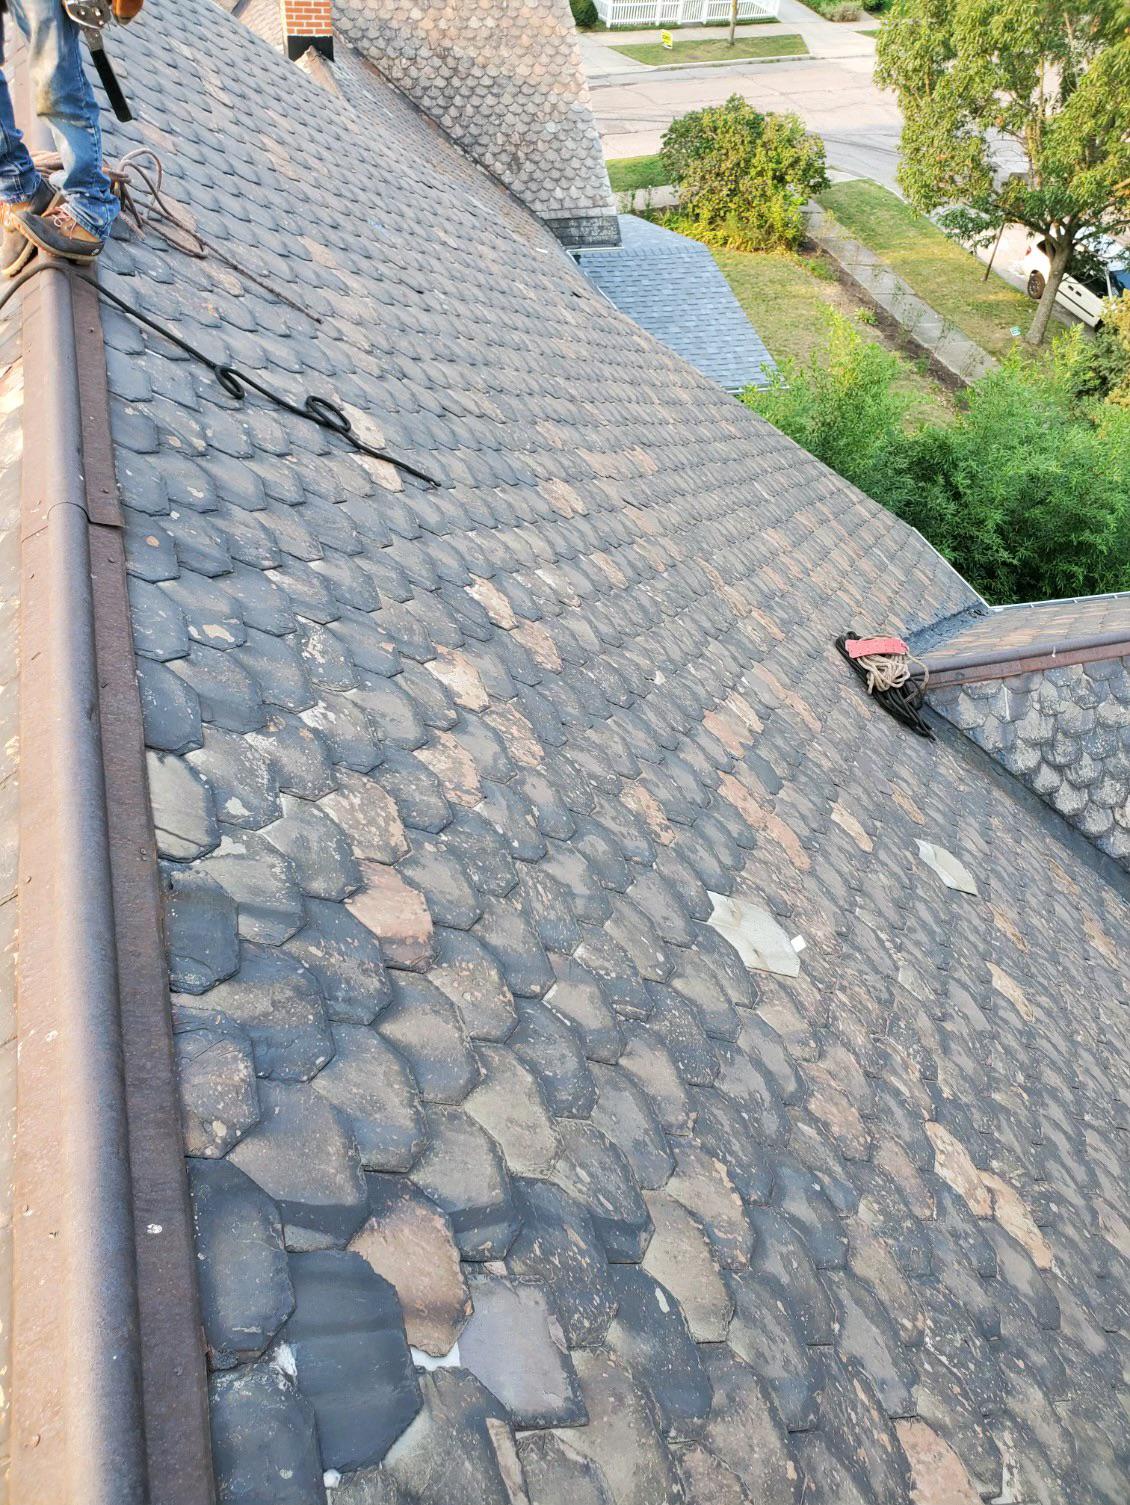 Slate roof to be replaced